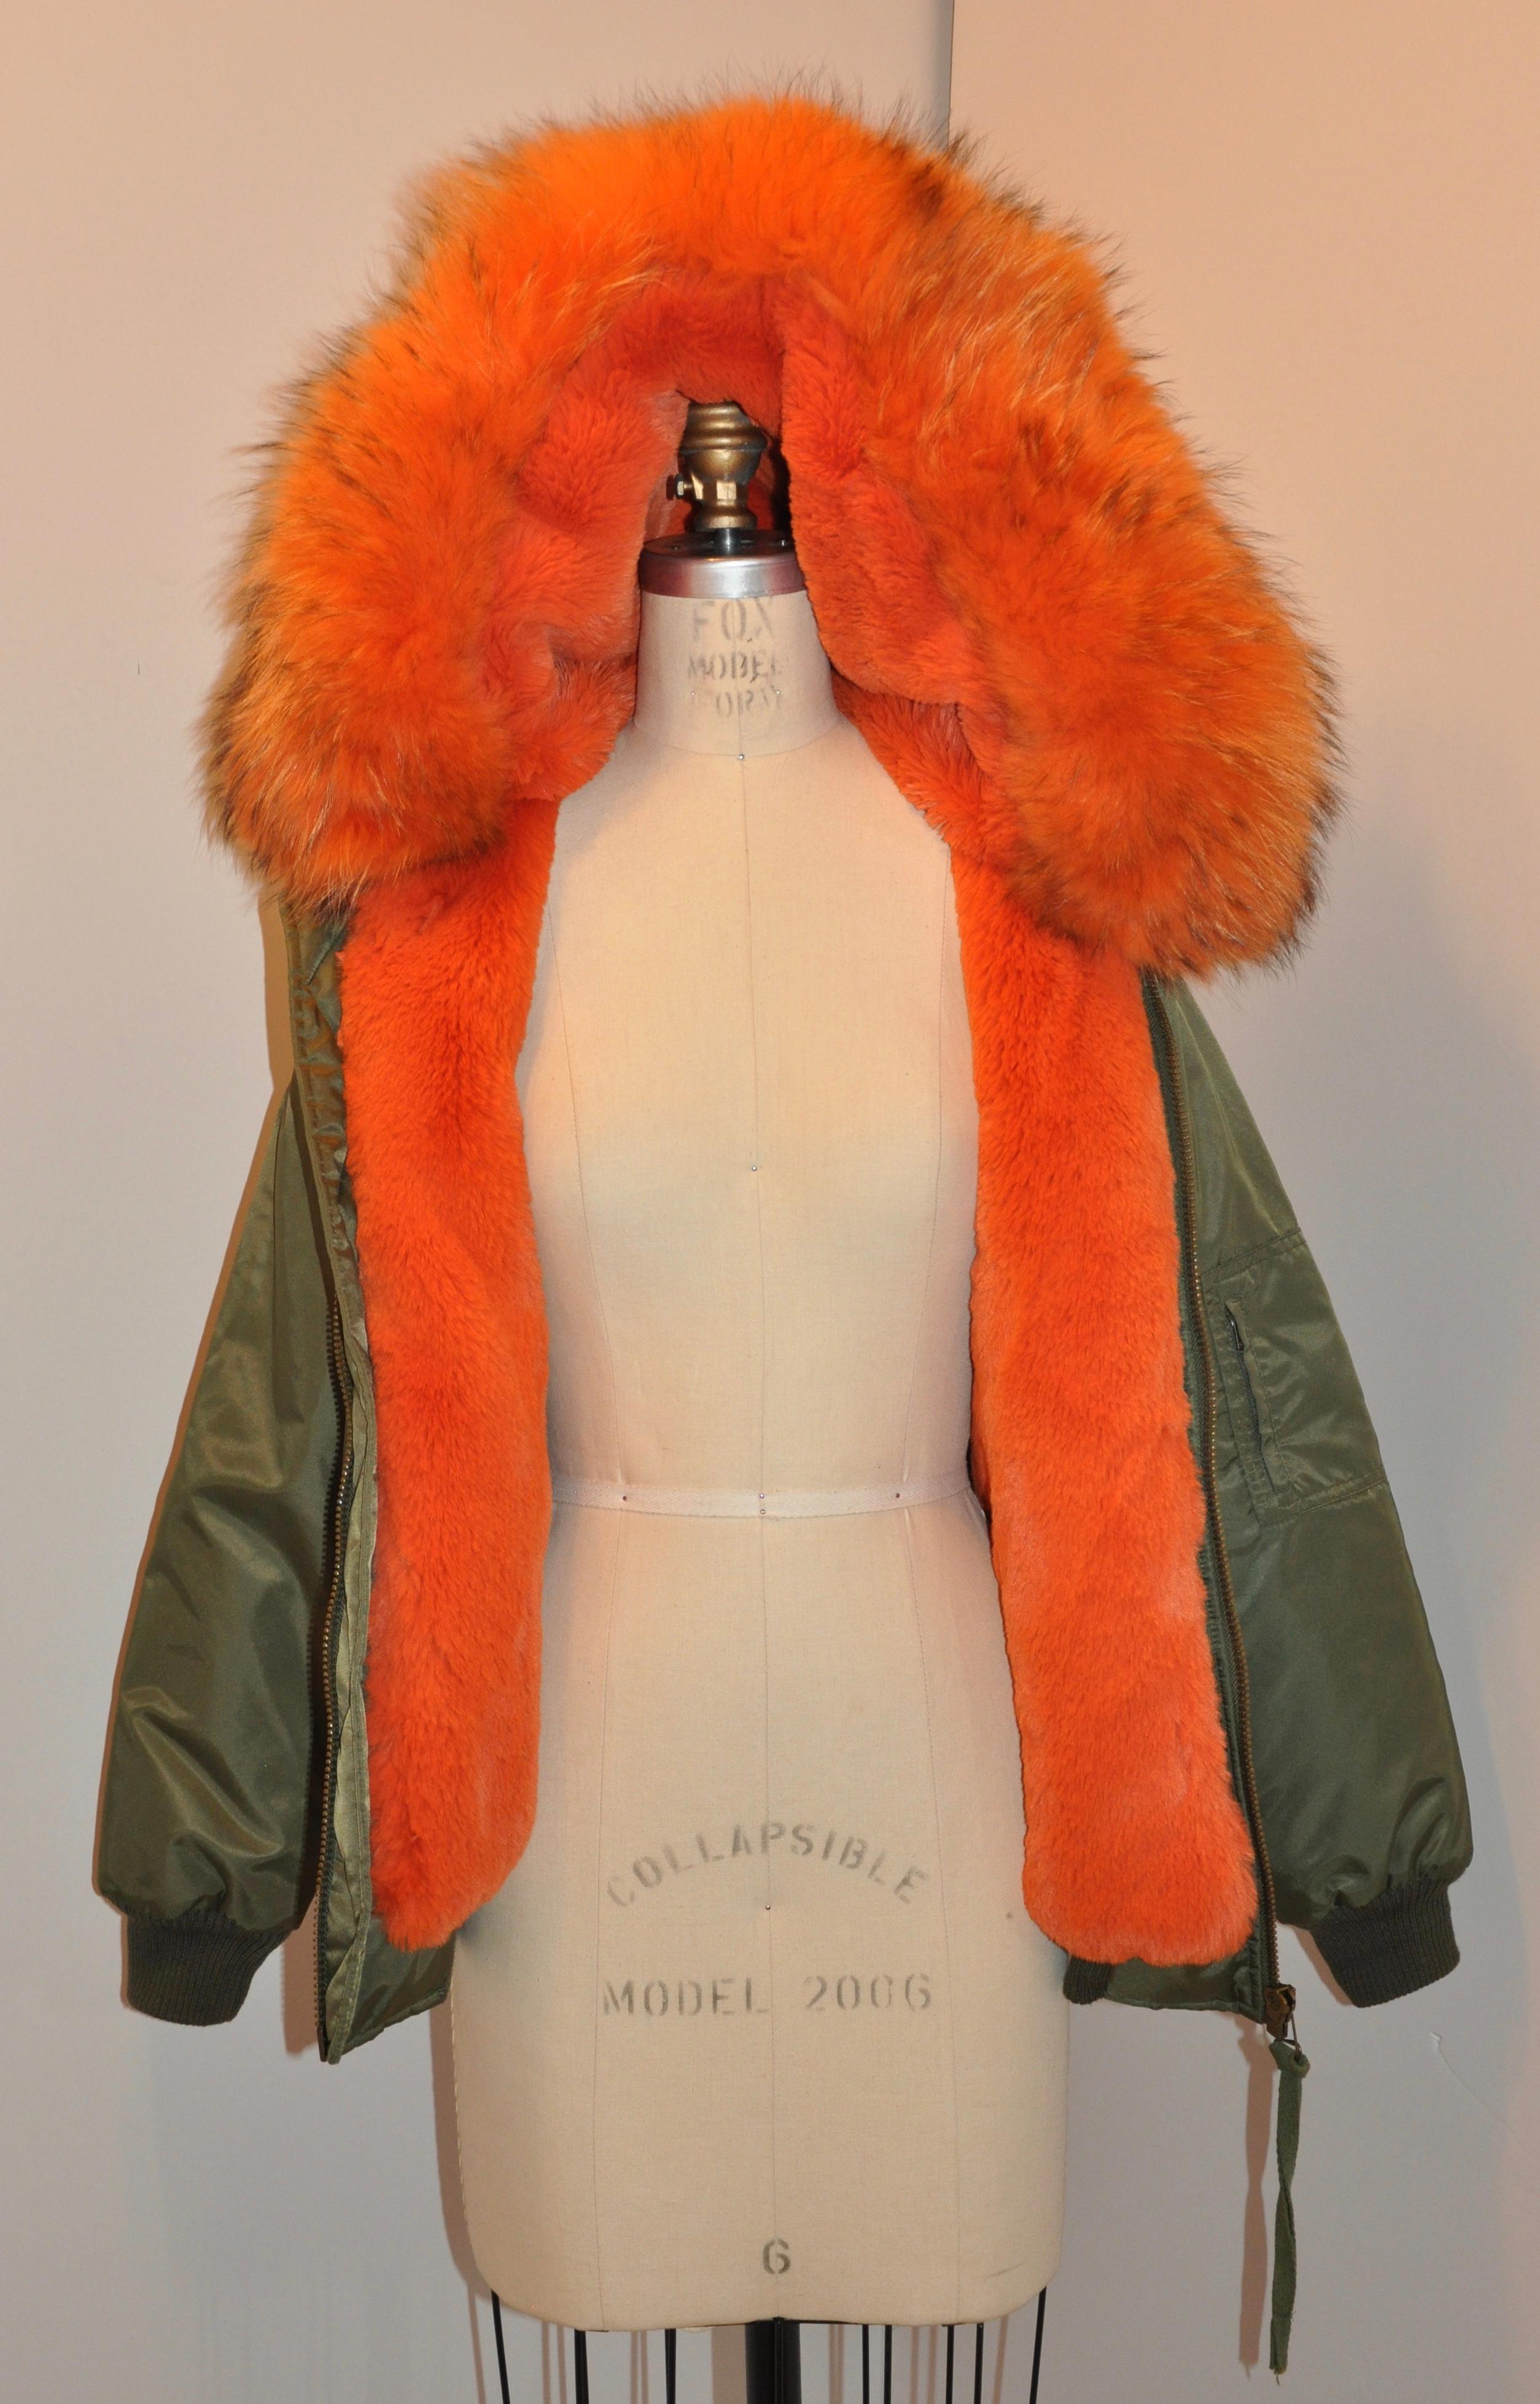 This wonderfully lightweight and cozy Olive-Green hooded zippered jacket is fully lined with bold sheared mink as well as bold fox in the hoodie. Shoulders measures 18 inches across, length is 25 1/2 inches, neck-to-shoulder is 5 1/4 inches, sleeve